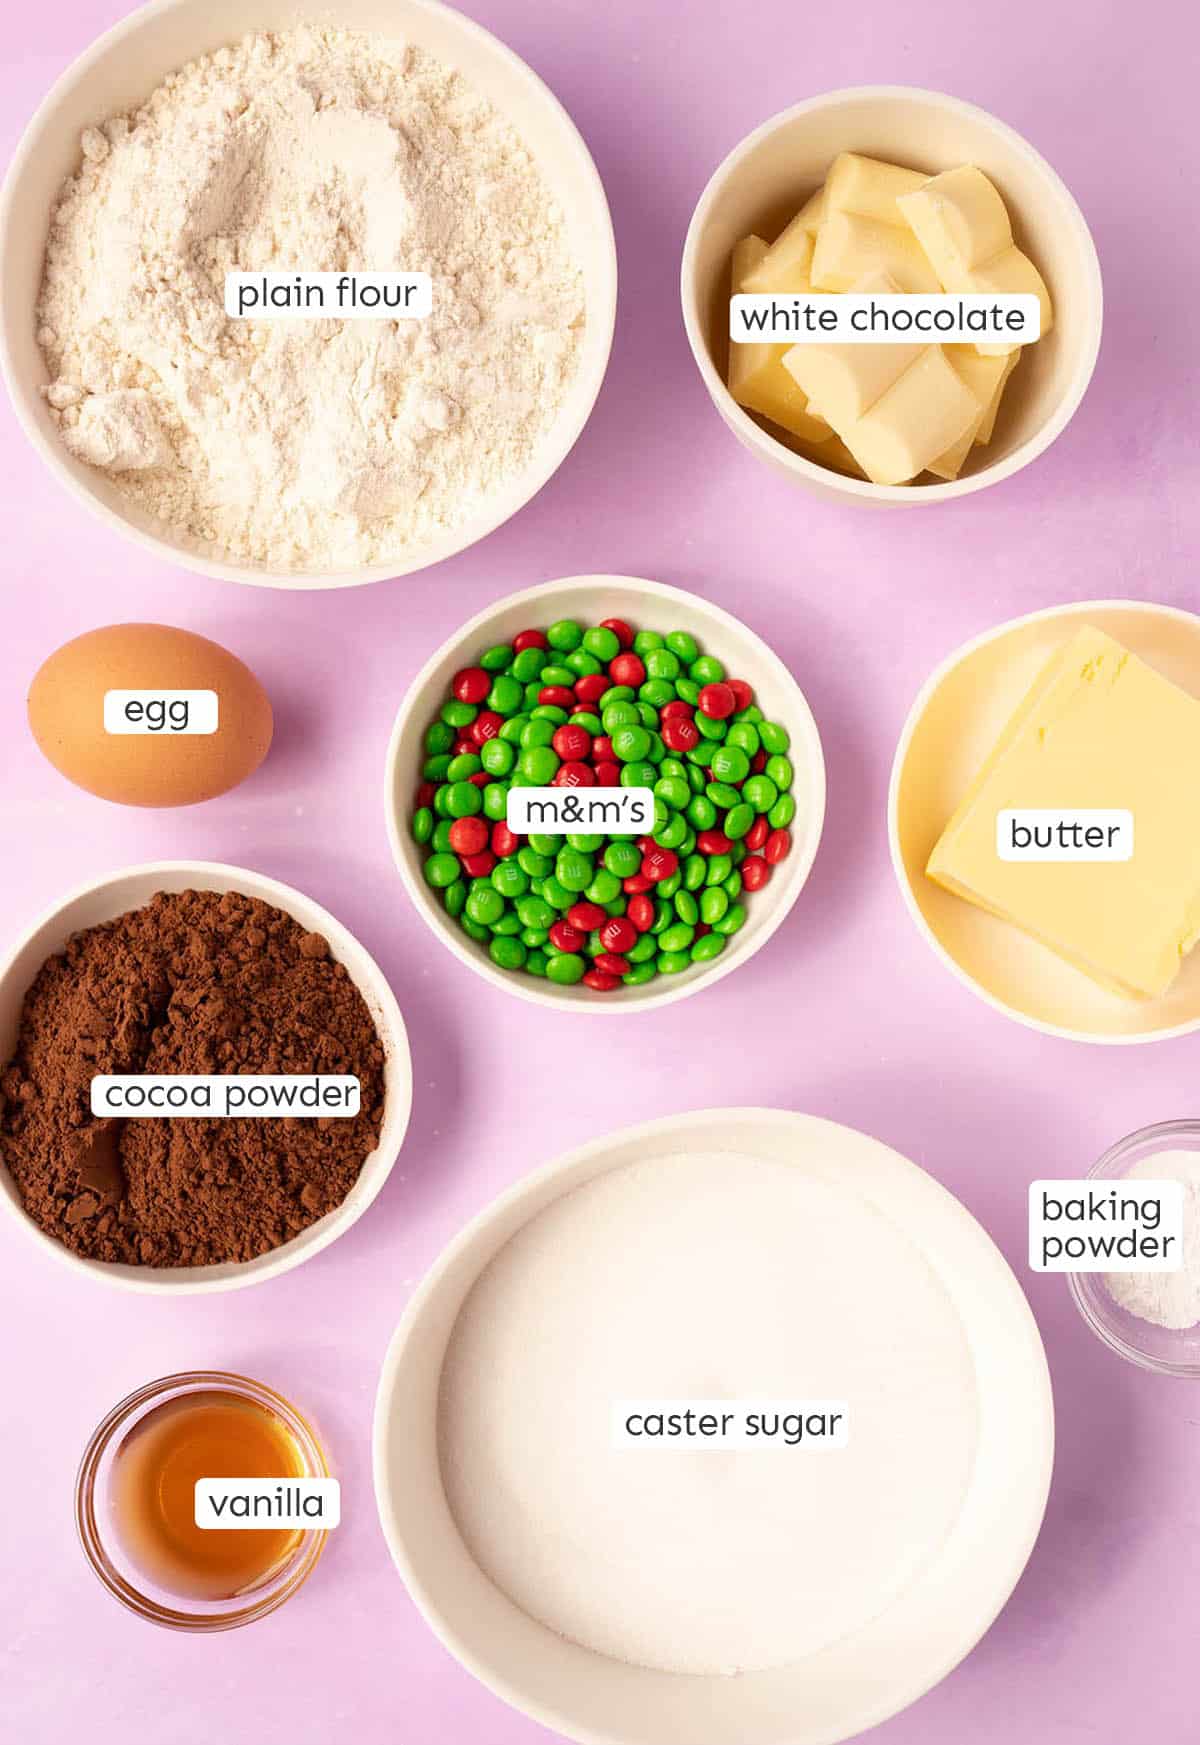 All the ingredients needed to make Chocolate Sugar Cookies from scratch.